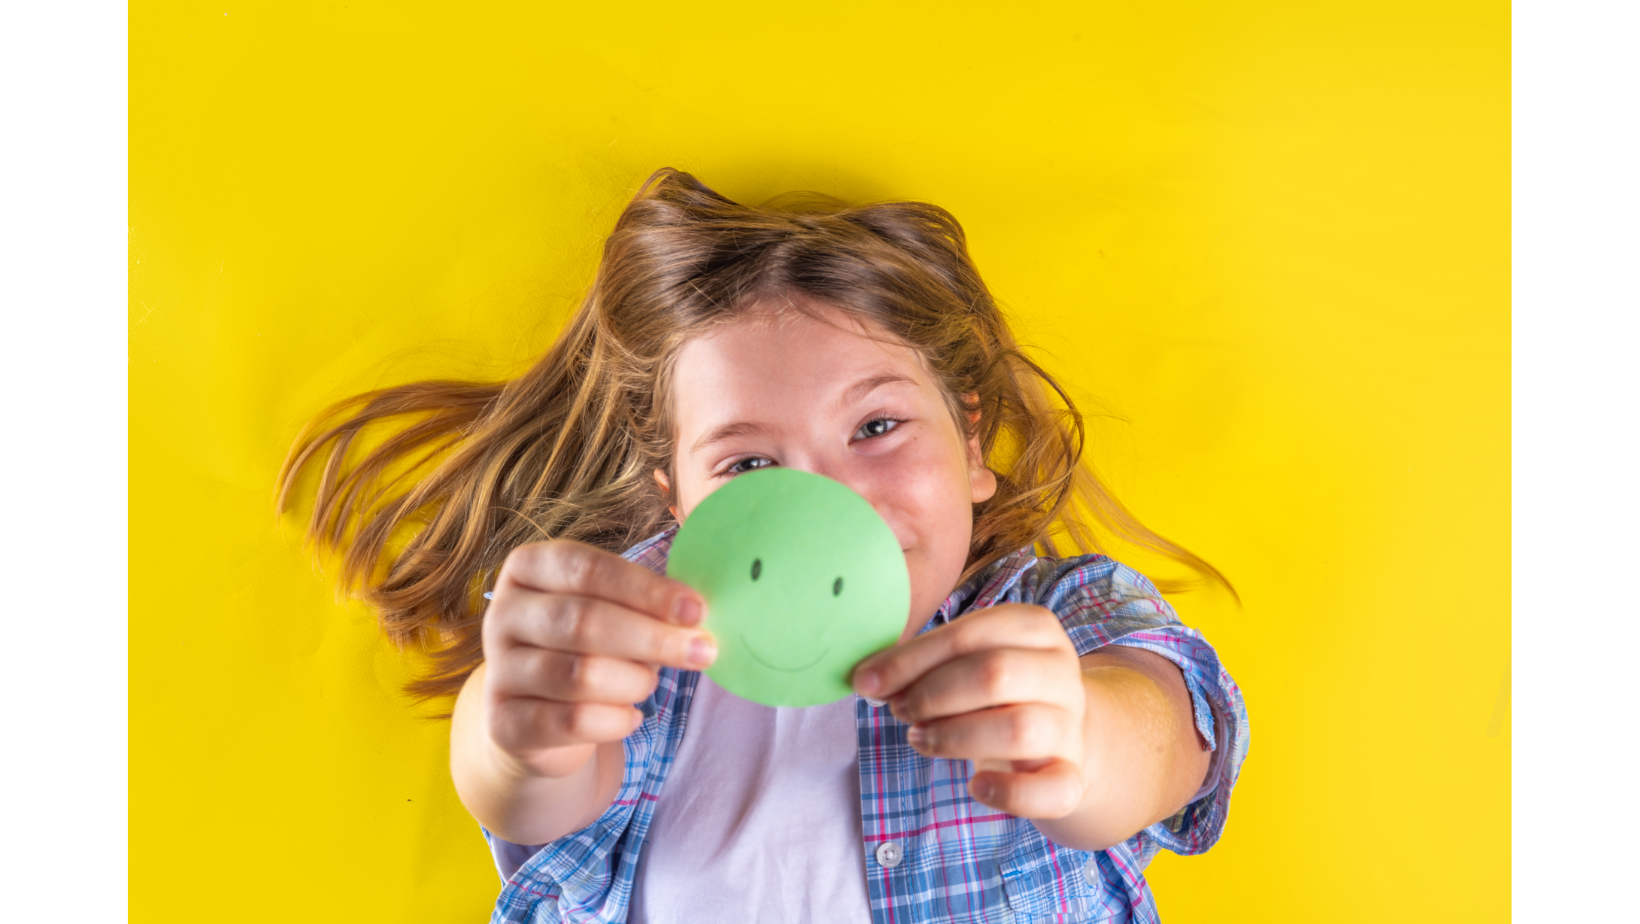 A young girl with long brown hair smiles against a yellow background while holding a green smiley face cutout piece of paper.